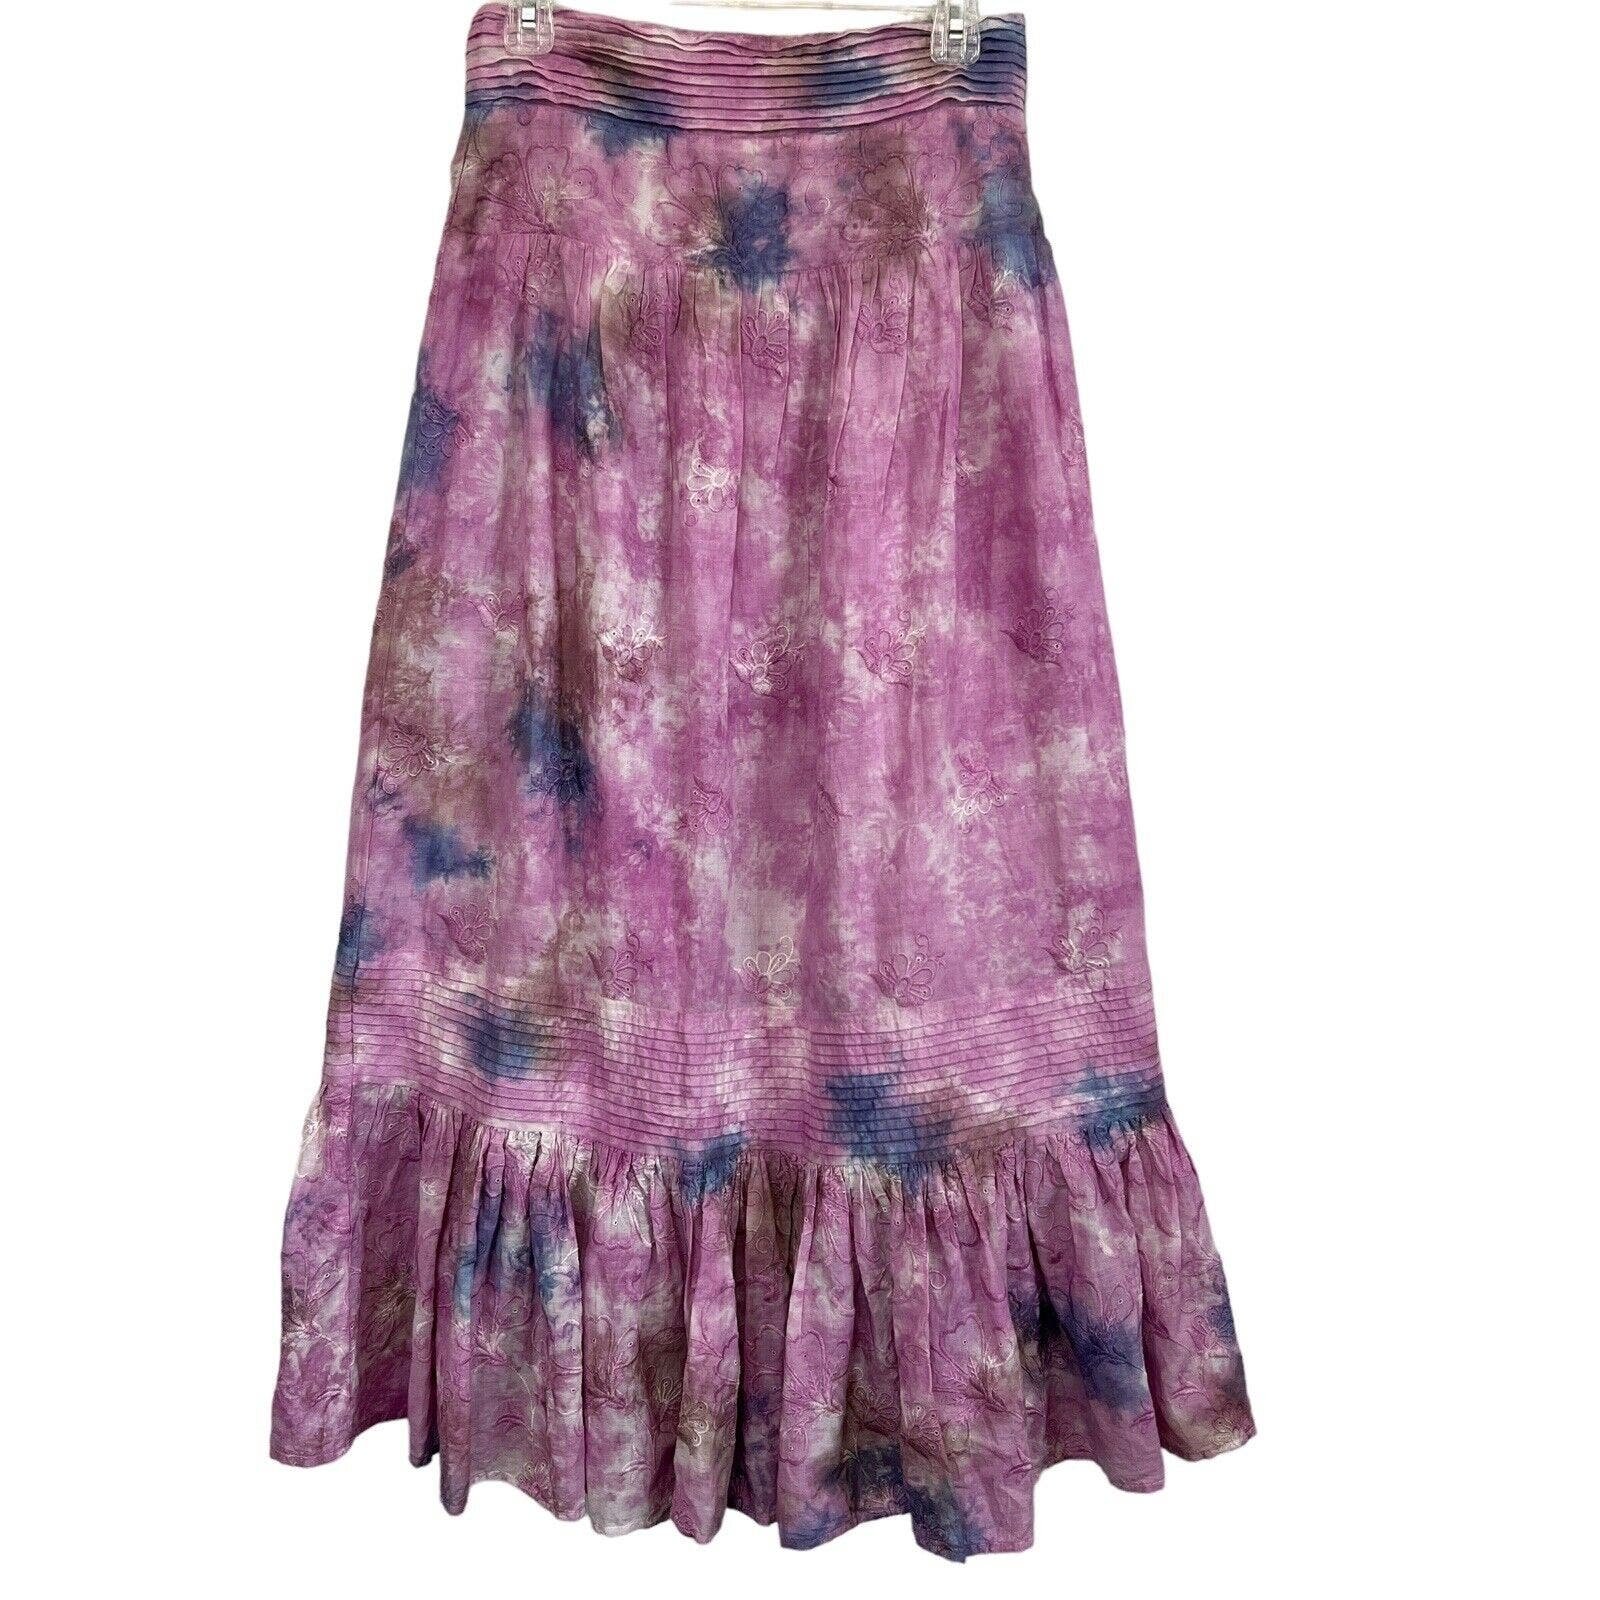 good price by Anthropologie Odessa Tie-Dye Maxi Skirt Size XS ovfp5mYE3 Outlet Store